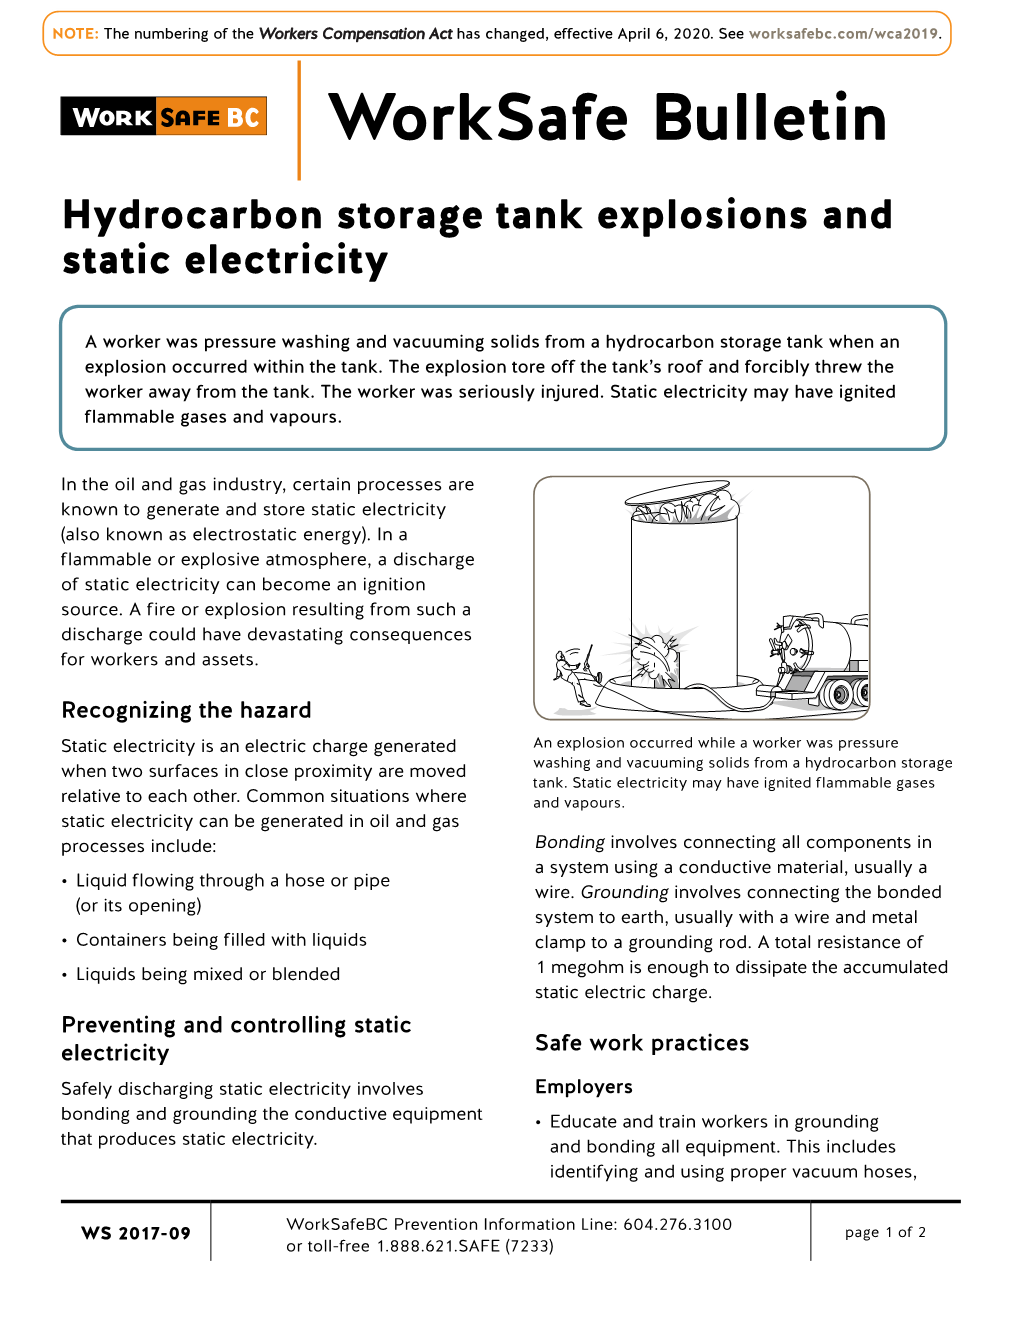 Hydrocarbon Storage Tank Explosions and Static Electricity